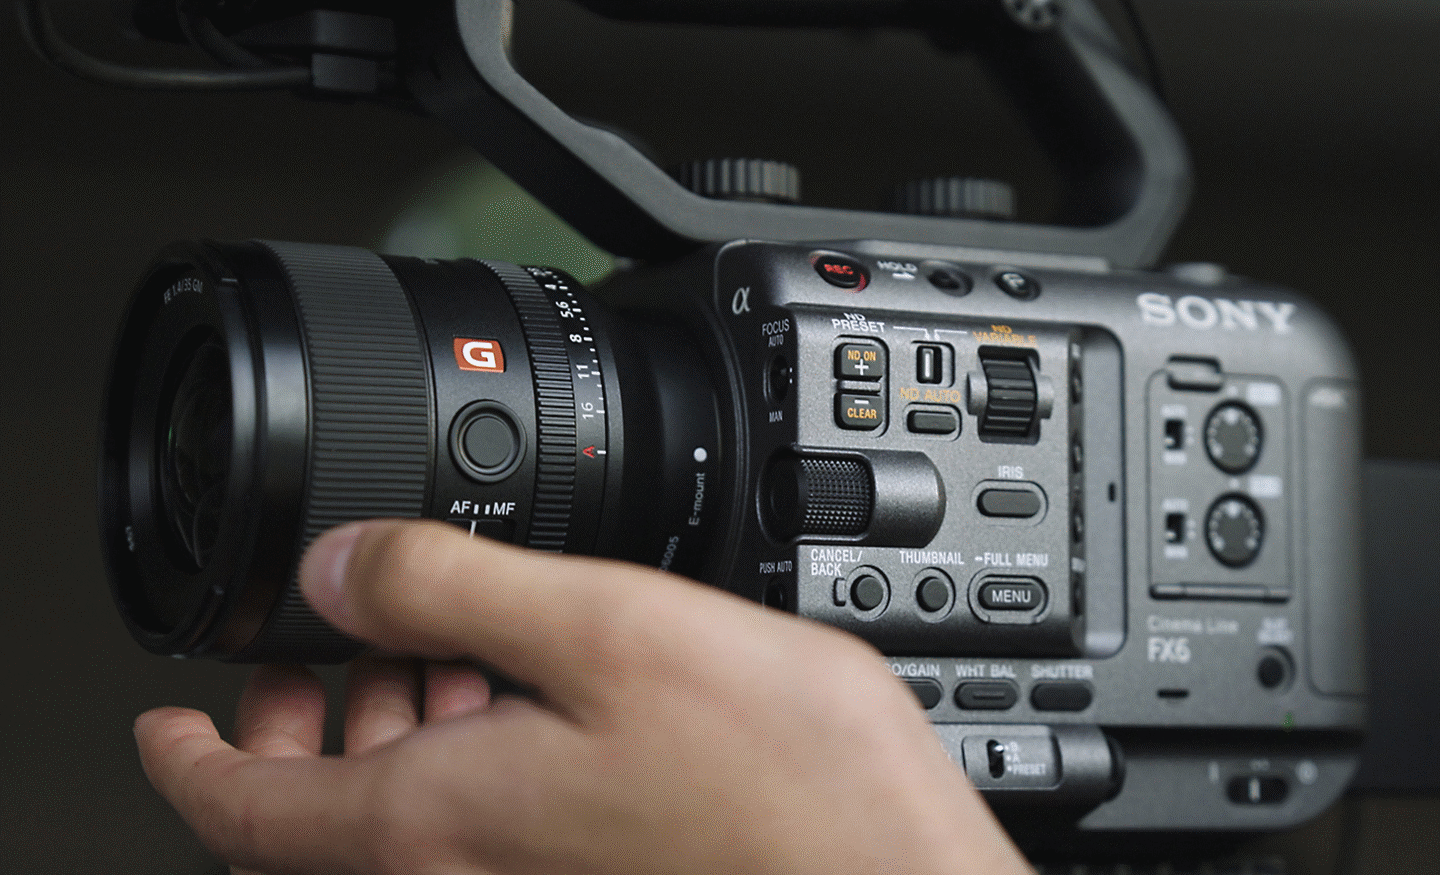 Close-up photo of the ILME-FX6 being used to film